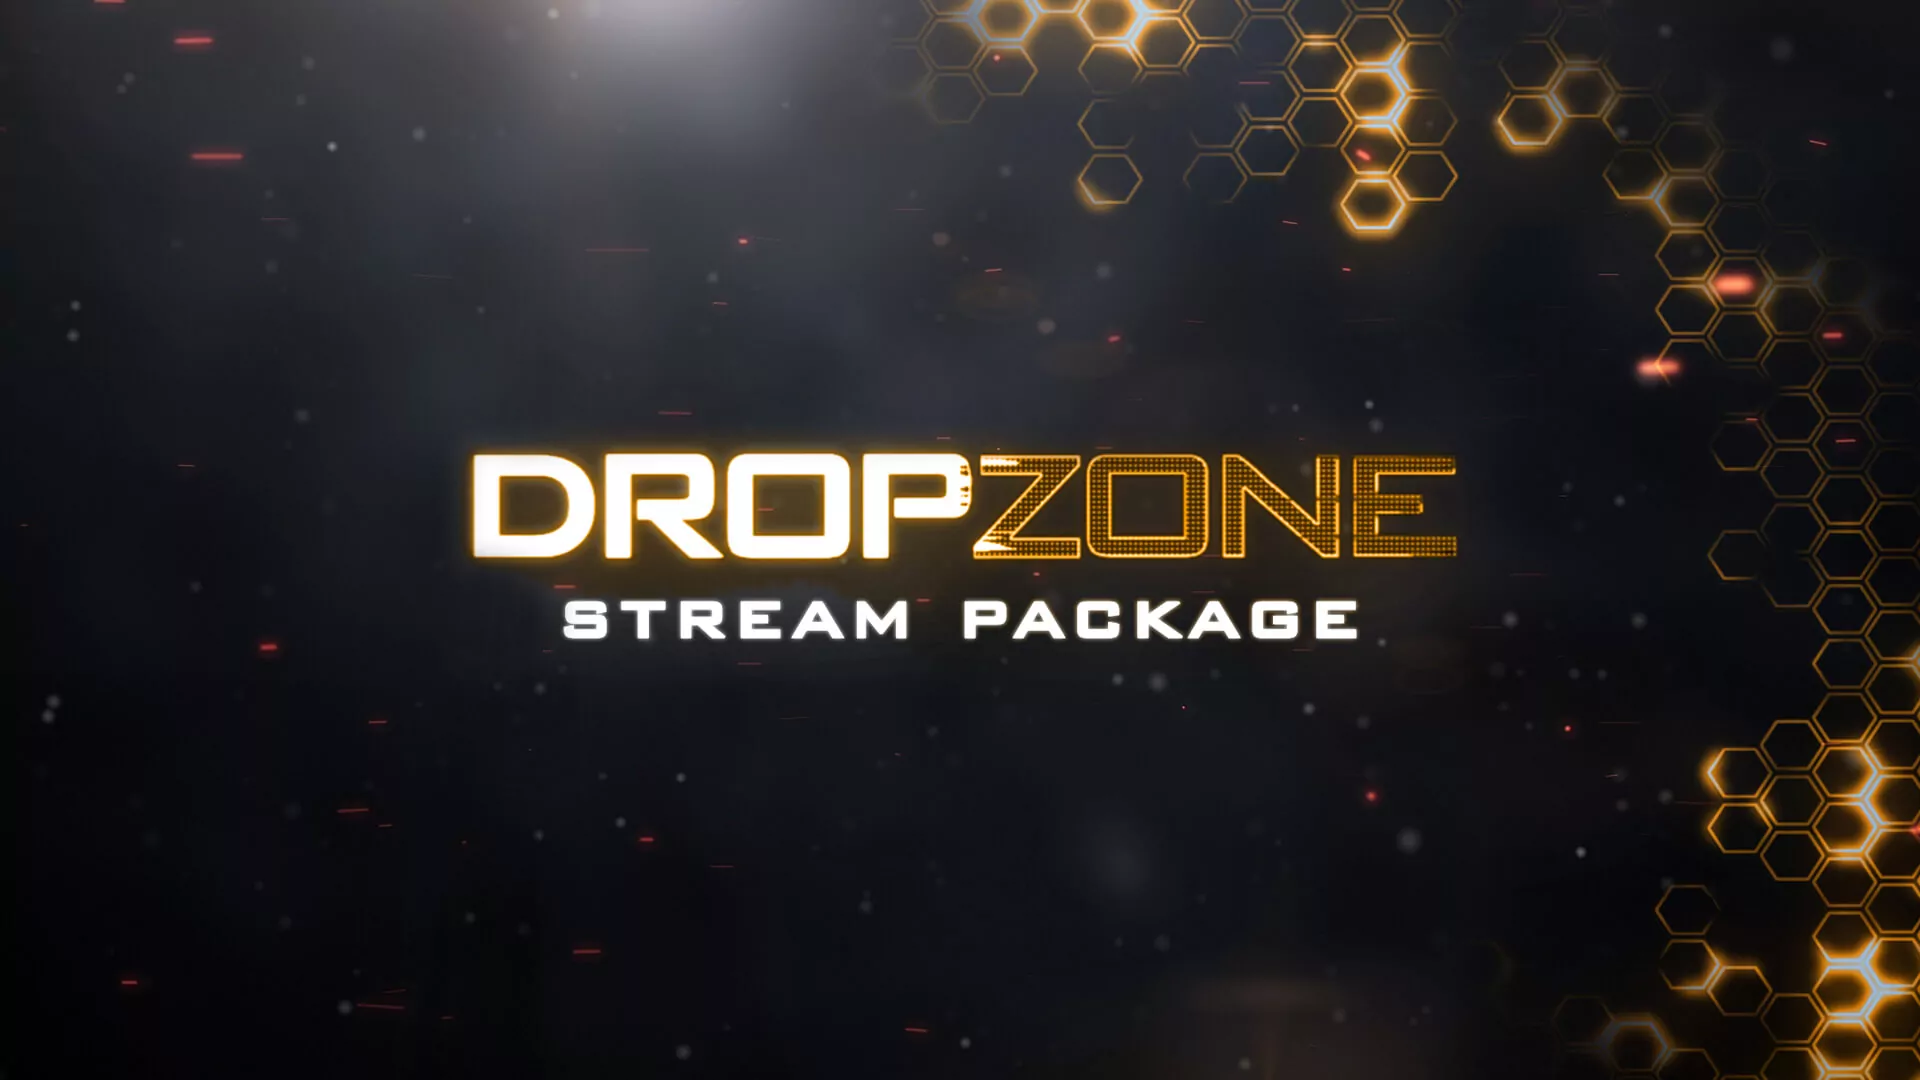 Dropzone - Stream Package - Main Image